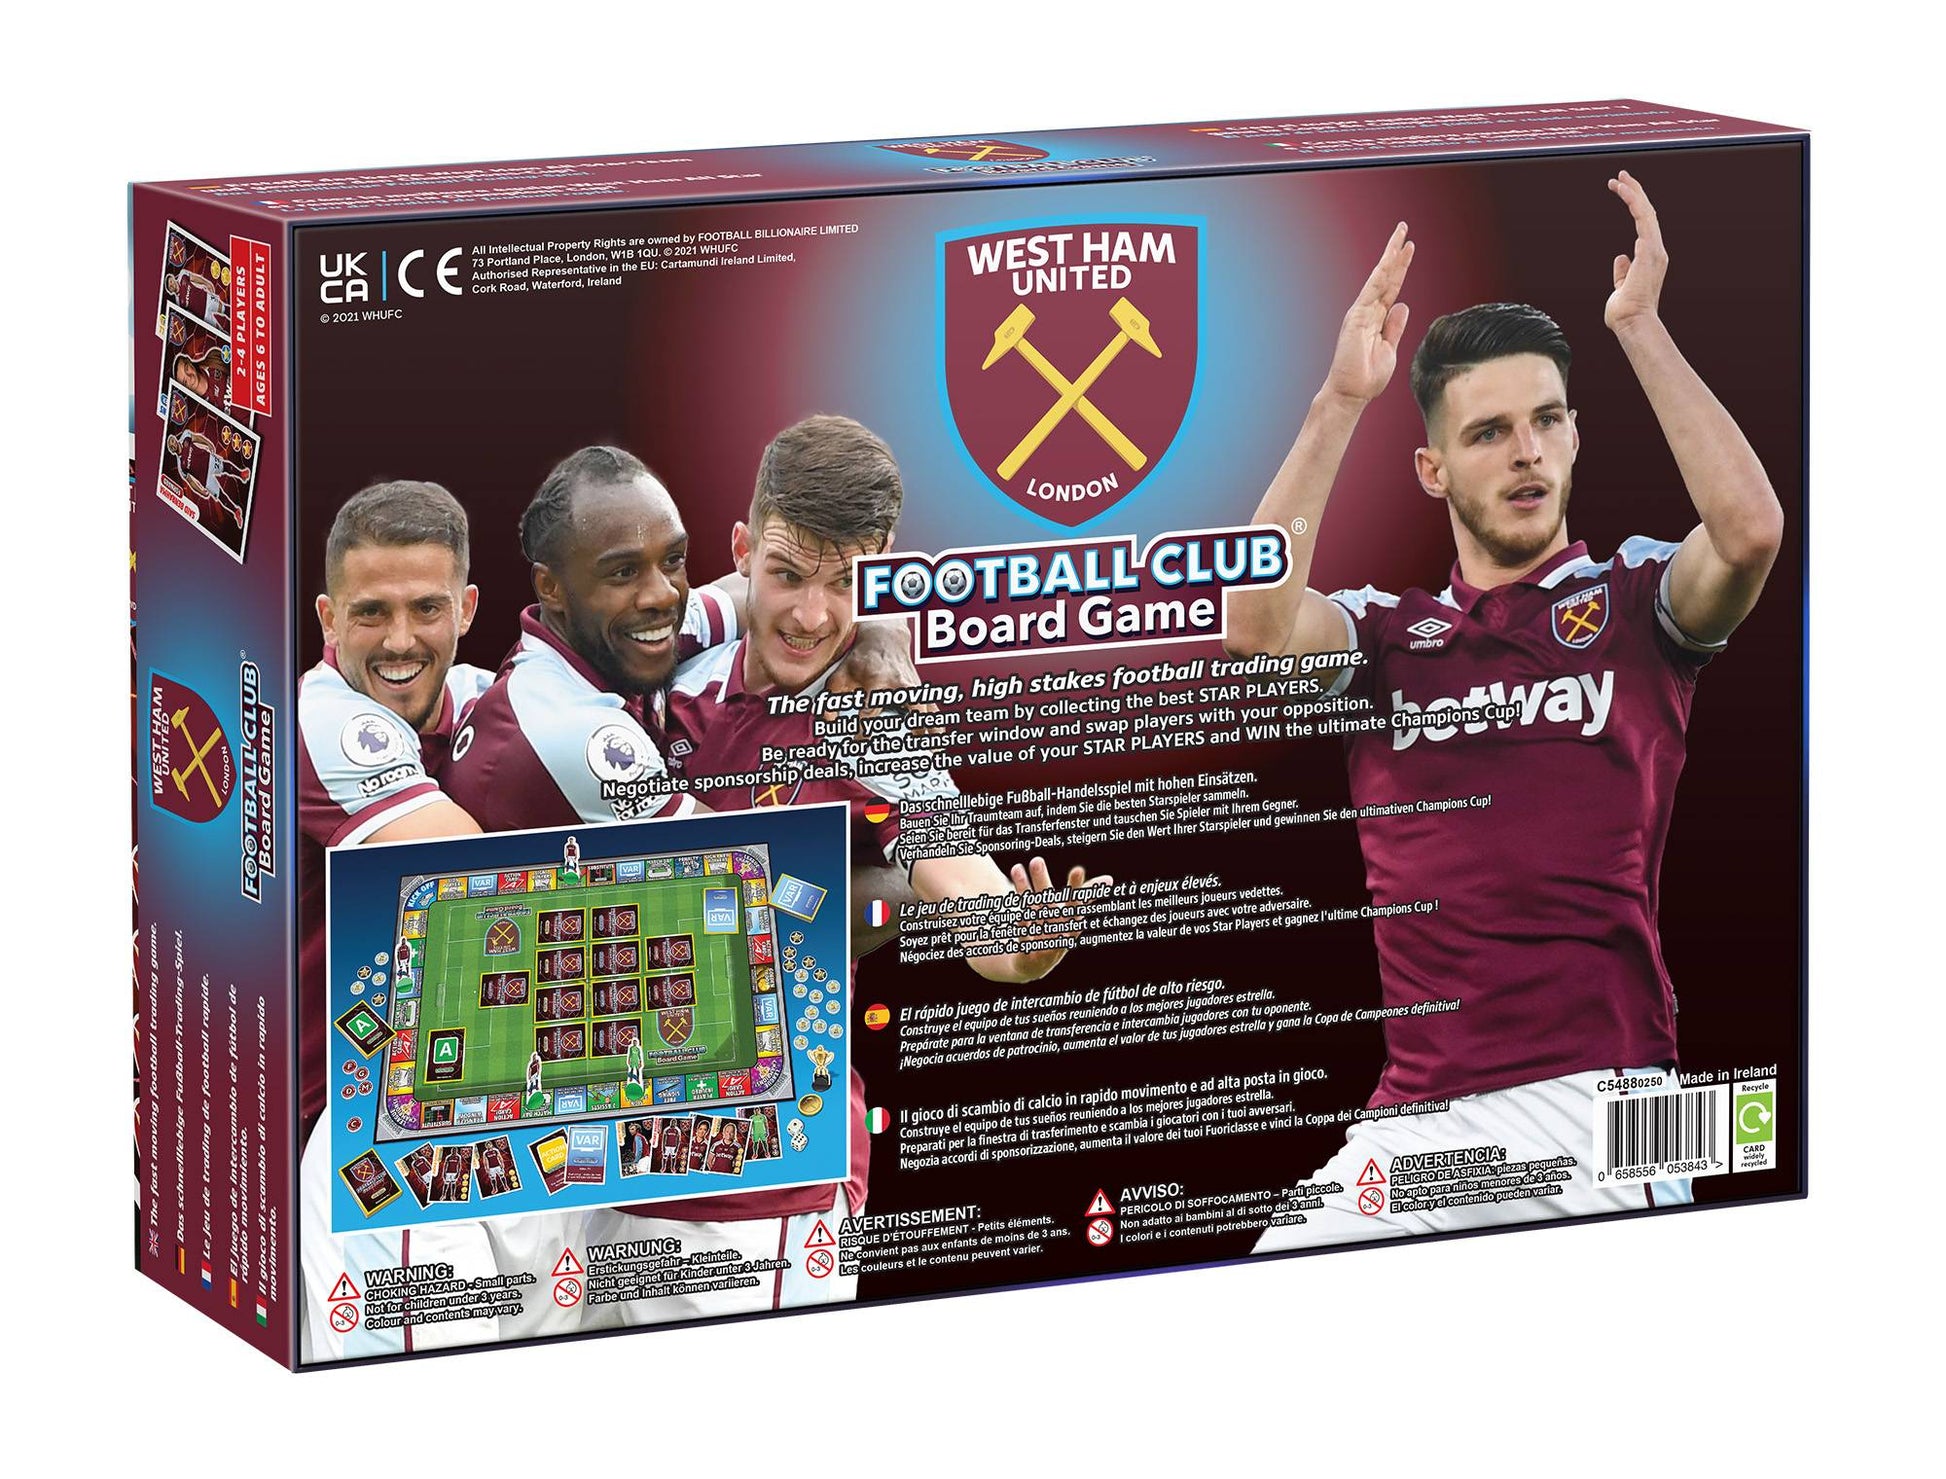 West Ham Football Club Board Game. Build the ultimate Hammers team with the official West Ham United Football Club Board Game!